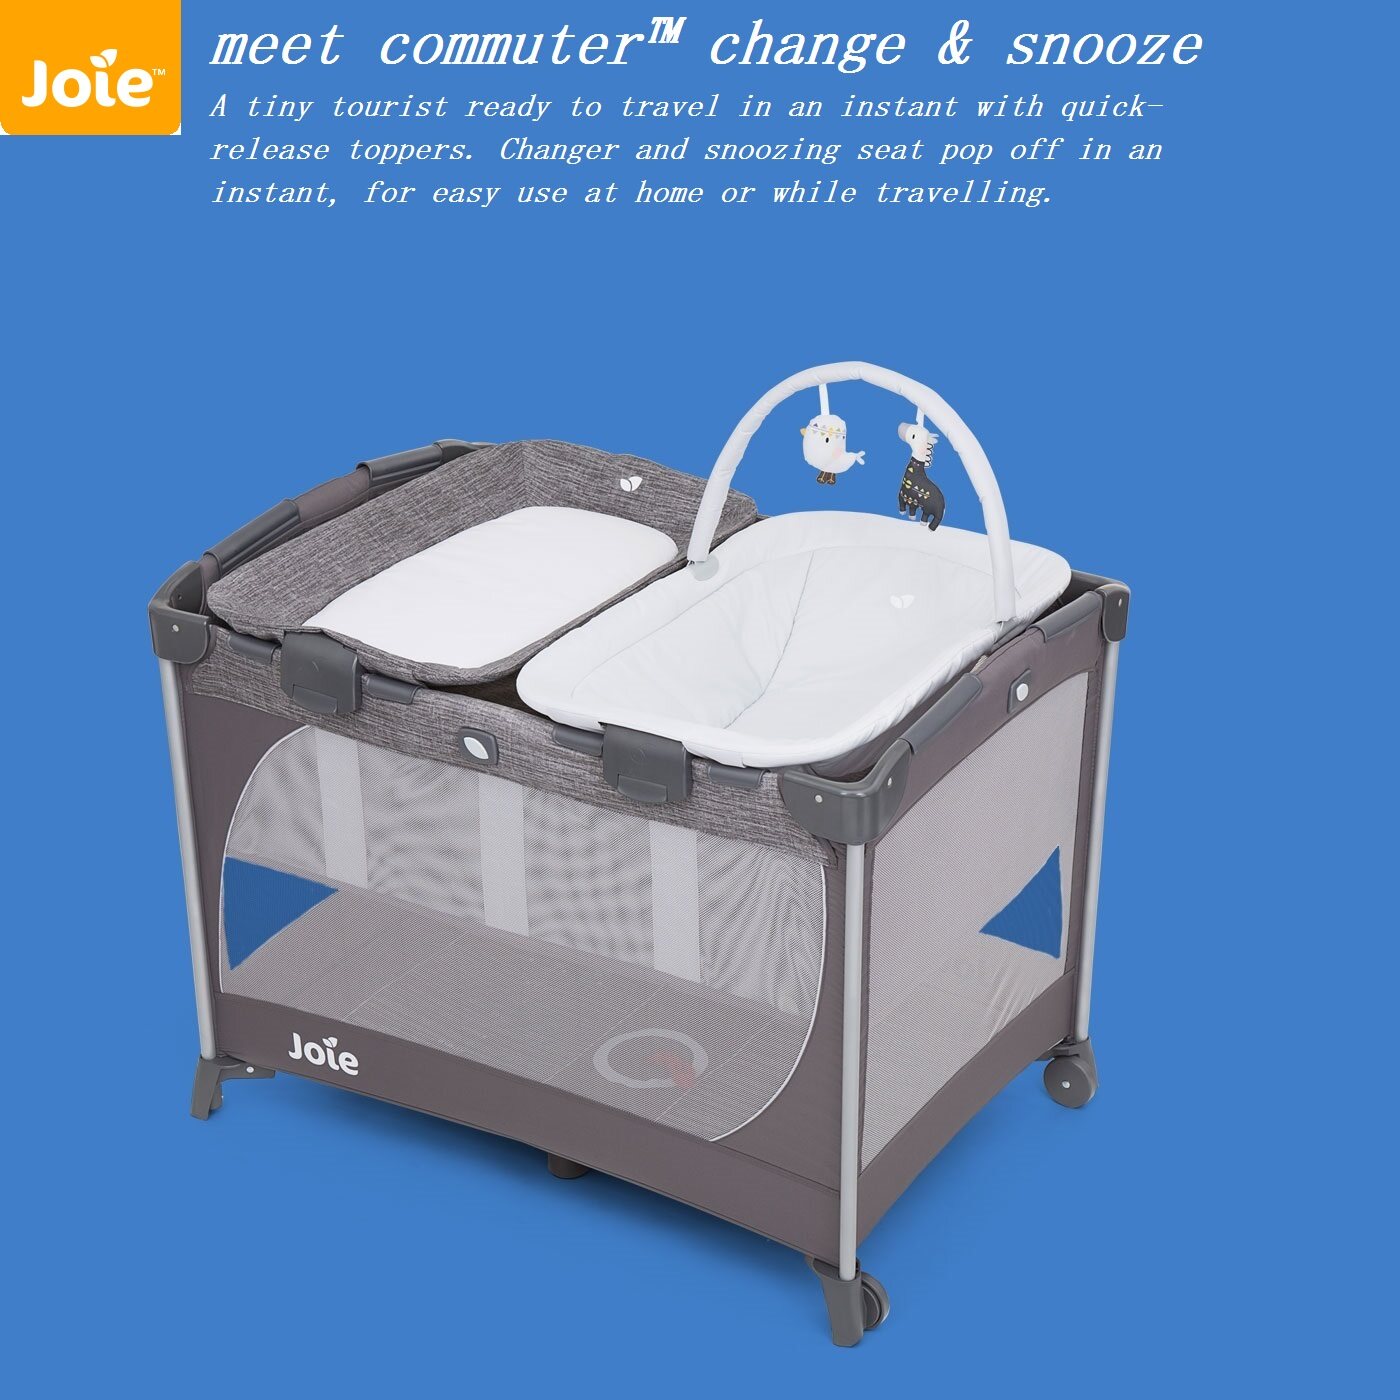 Joie commuter™ change & snooze travel cot